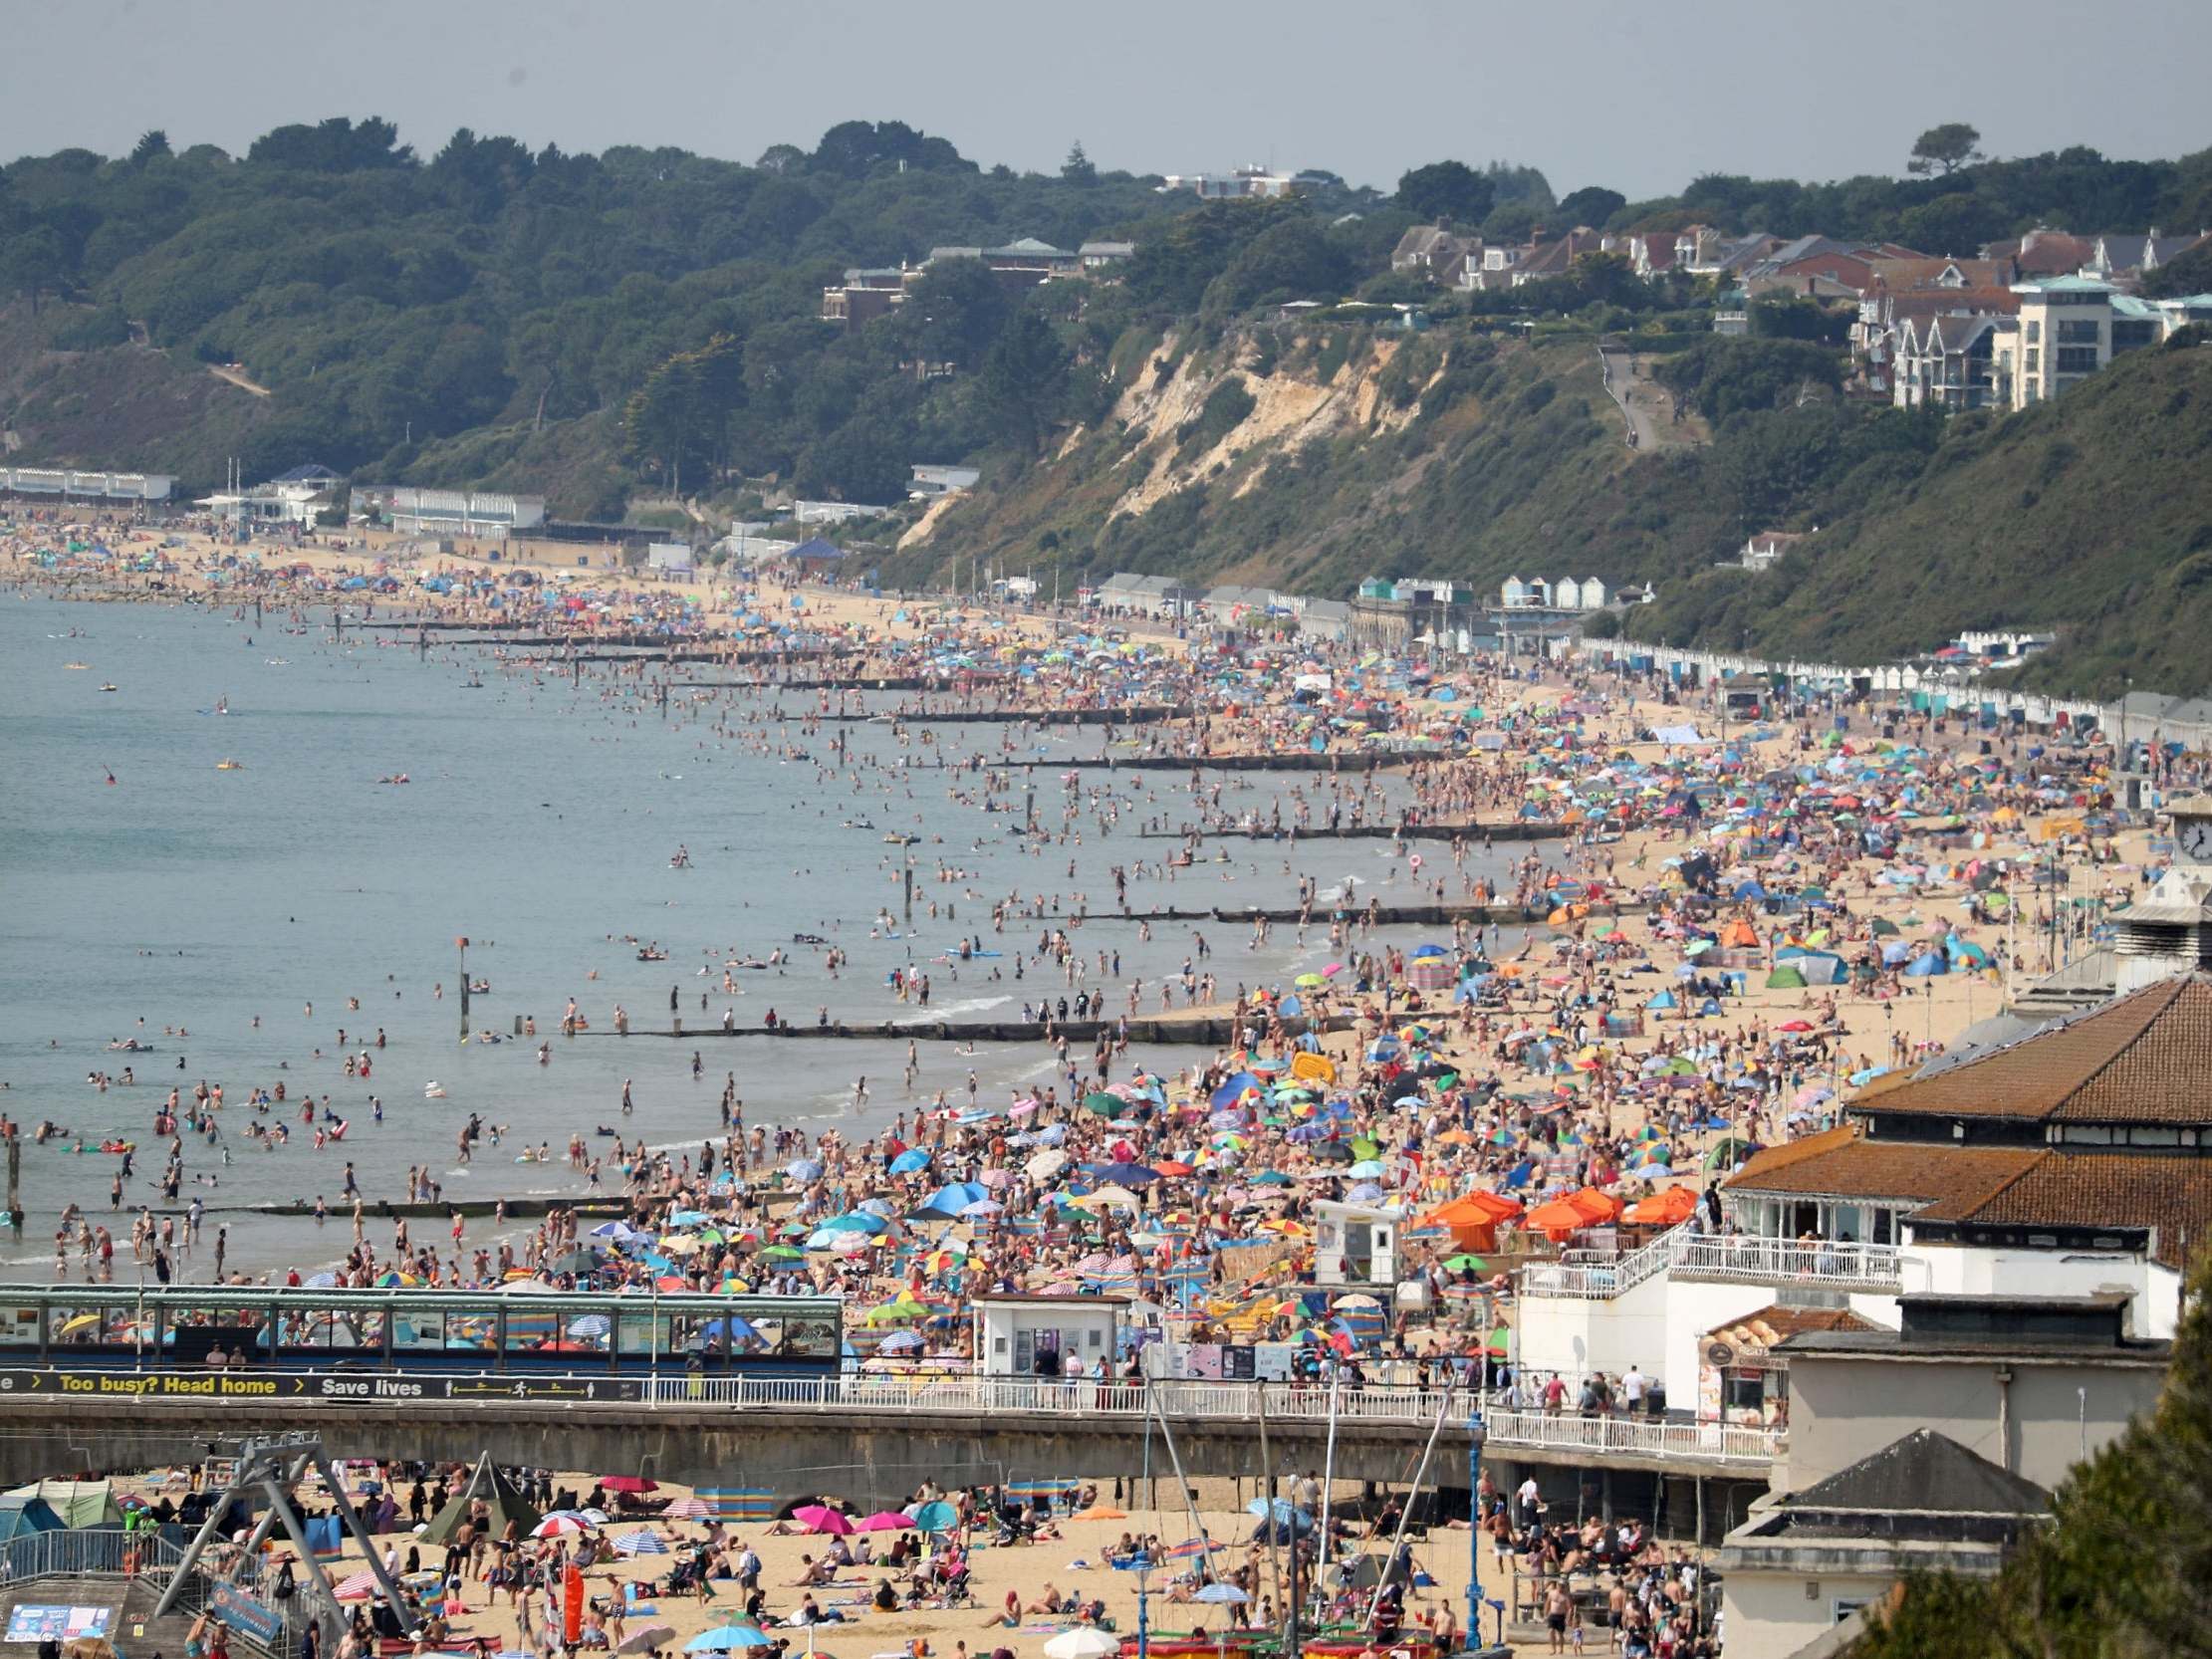 People enjoy the hot weather at Bournemouth beach in Dorset